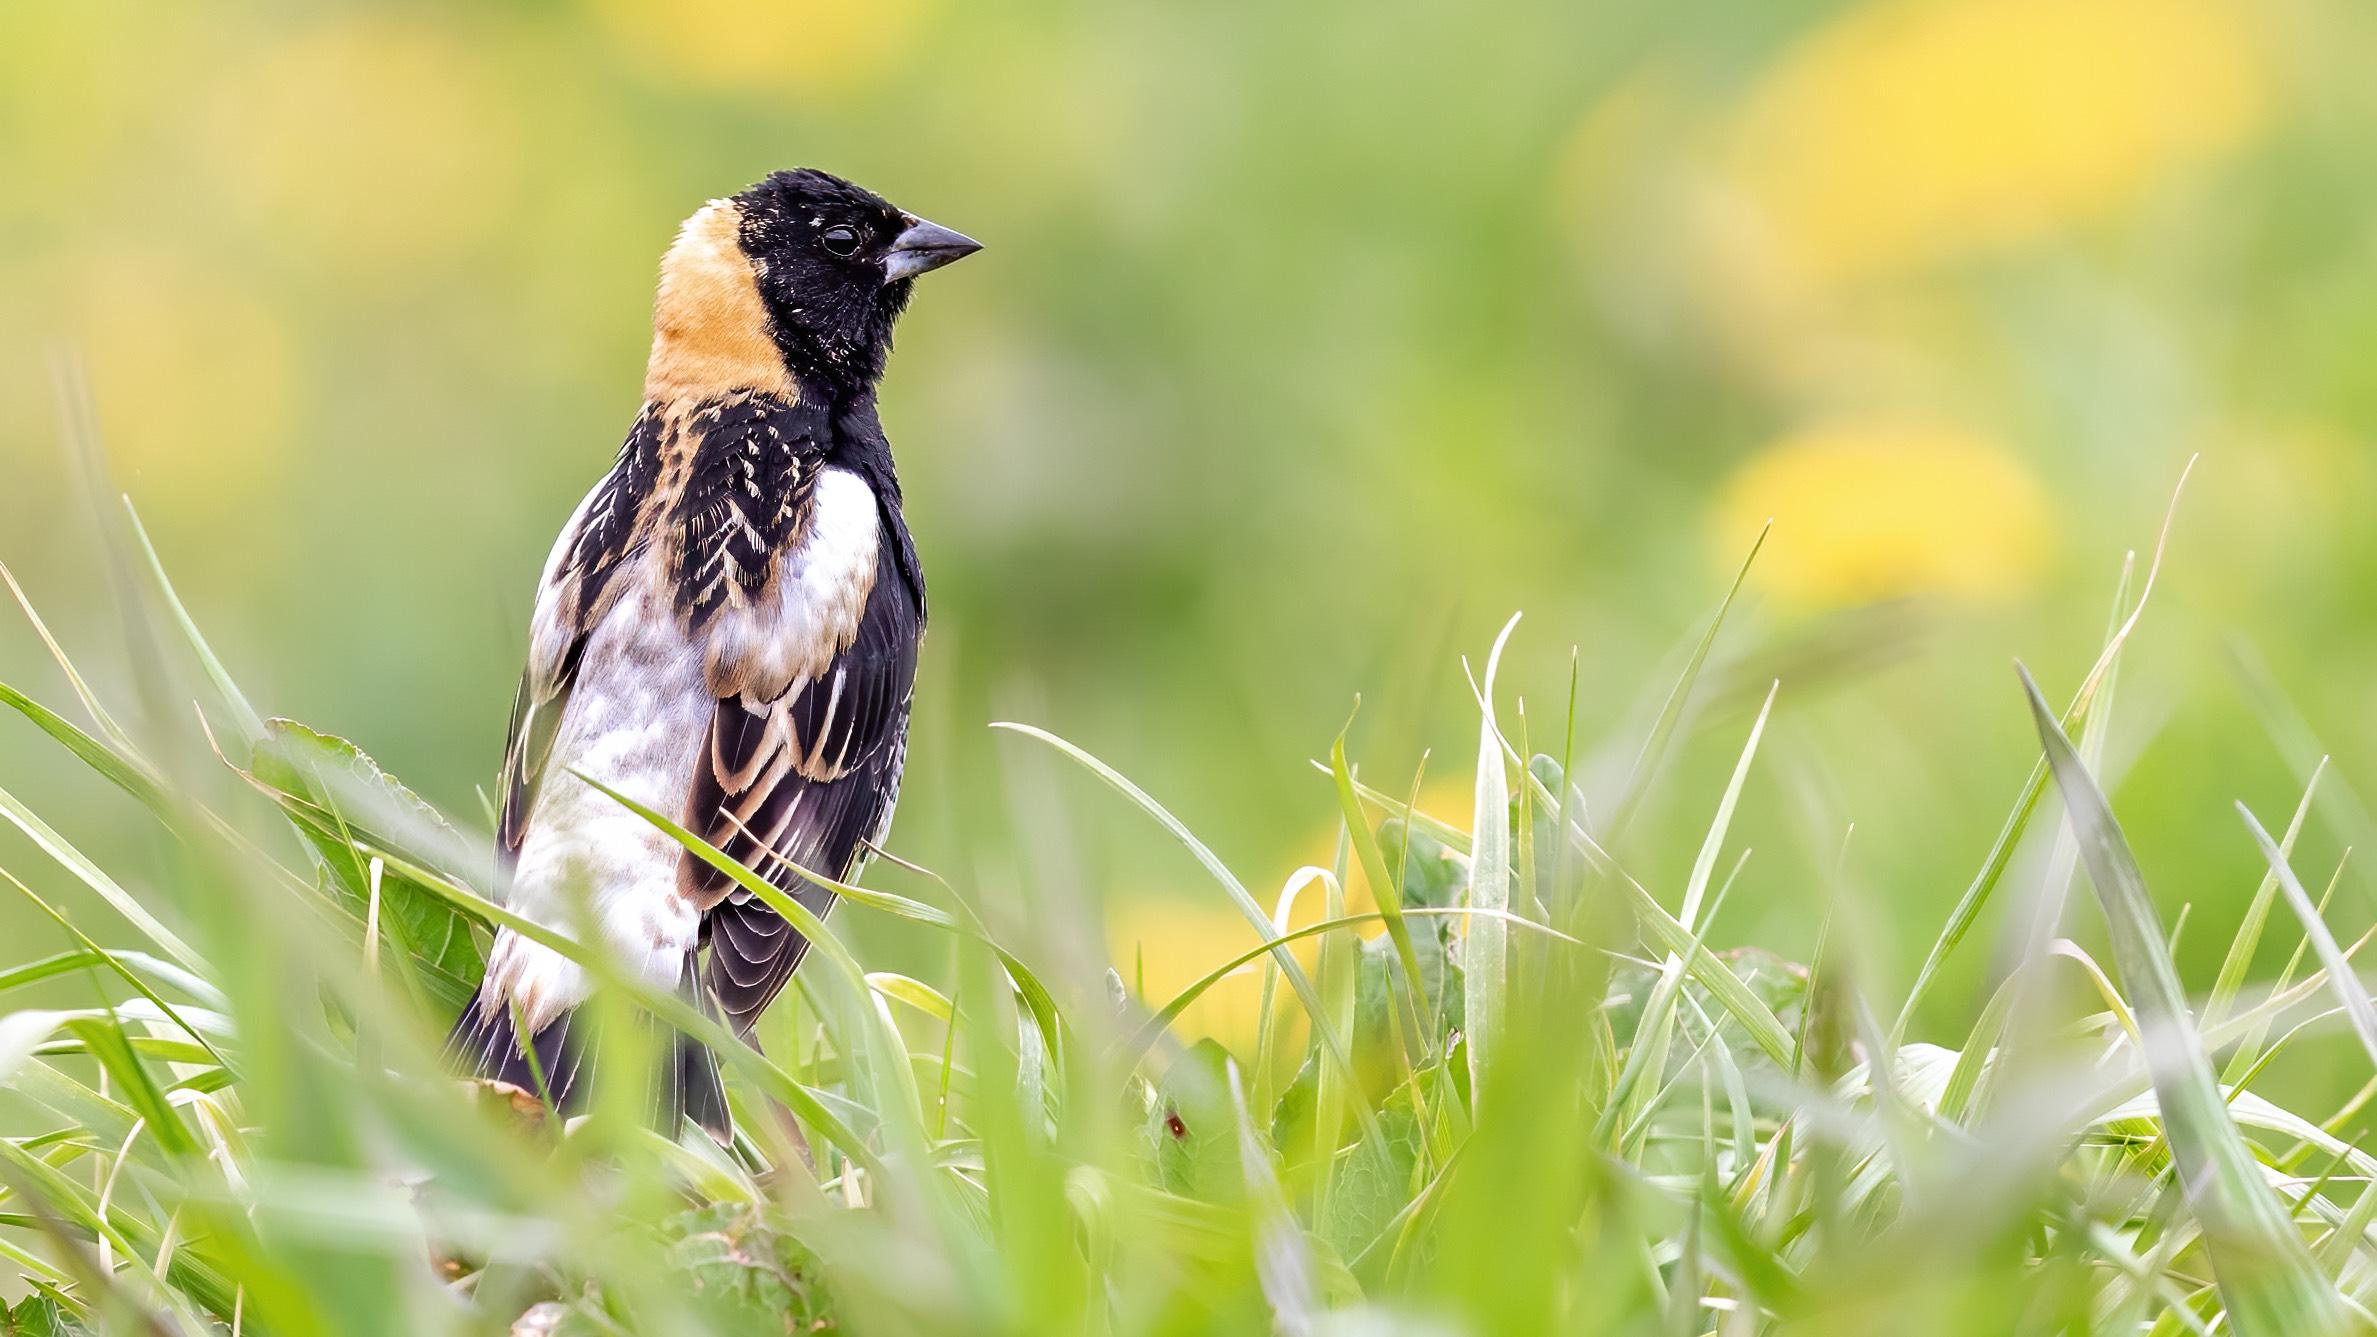 The bobolink is among the species of birds at a tipping point, according to a recent report from the North American Bird Conservation Initiative. (Brad Imhoff / Cornell Lab, Macaulay Library)